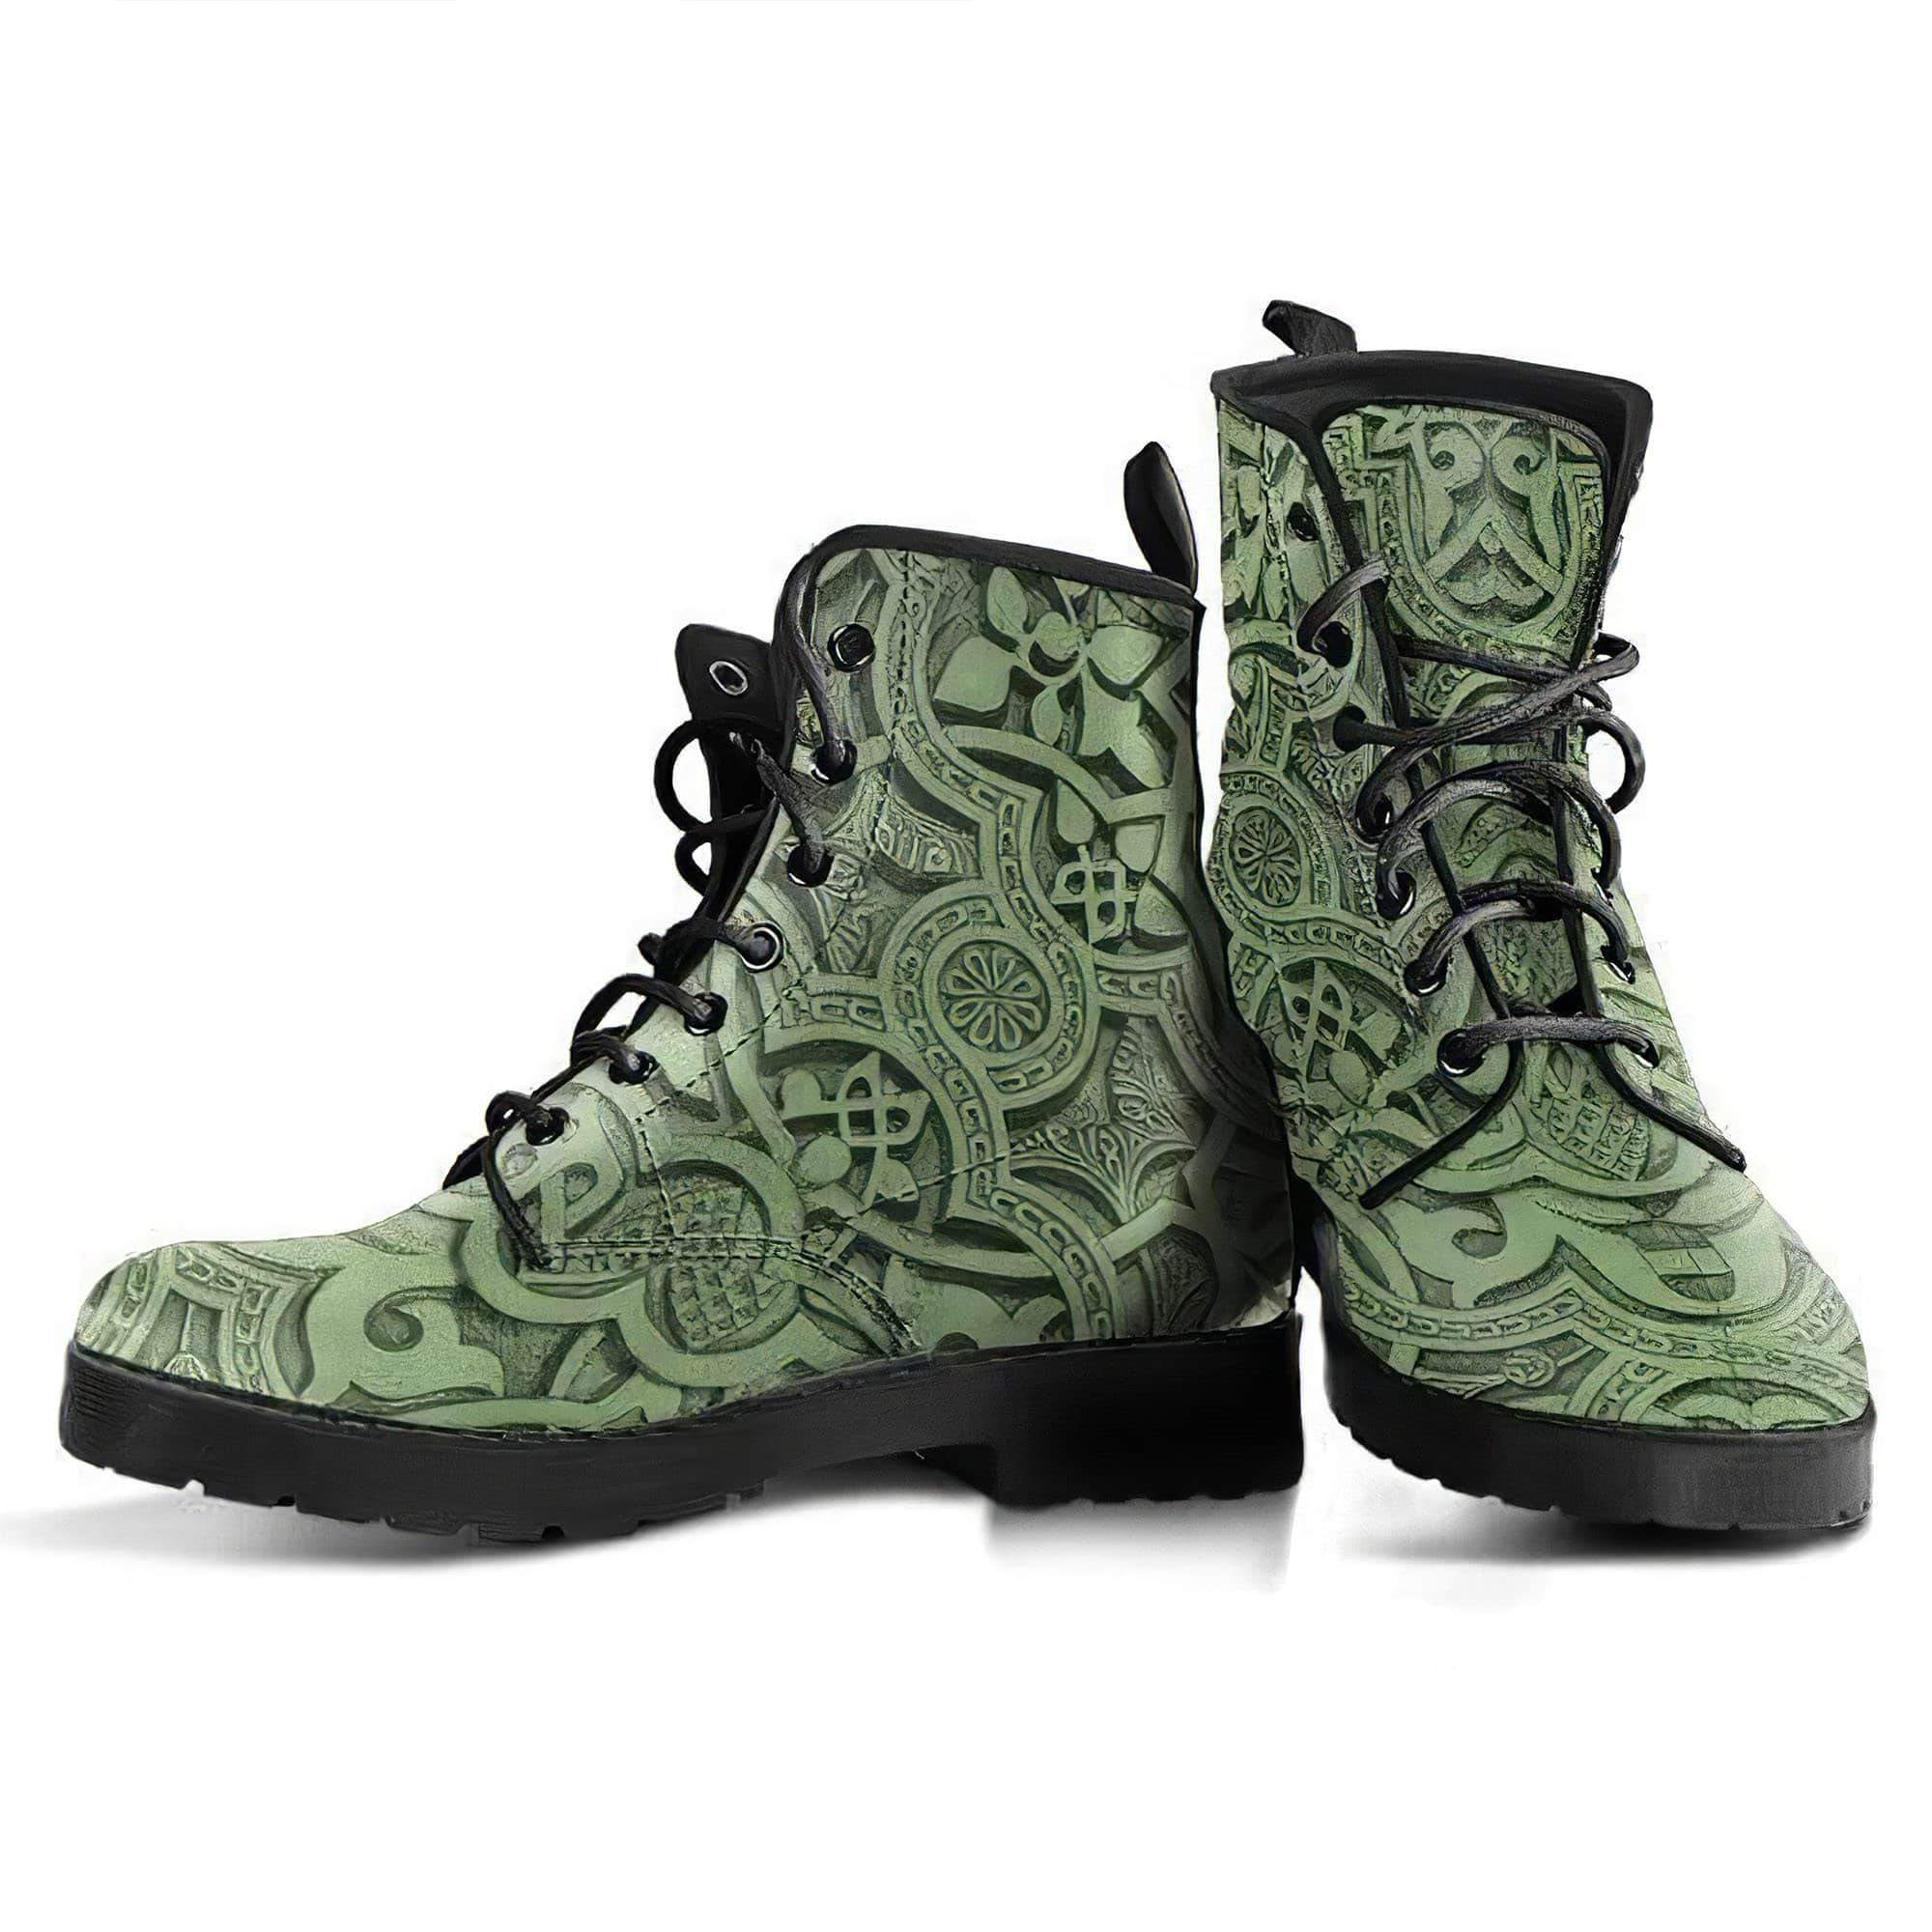 vintage-mandala-ceilings-in-sage-leather-boots-for-women-women-s-leather-boots-12051972194365.jpg